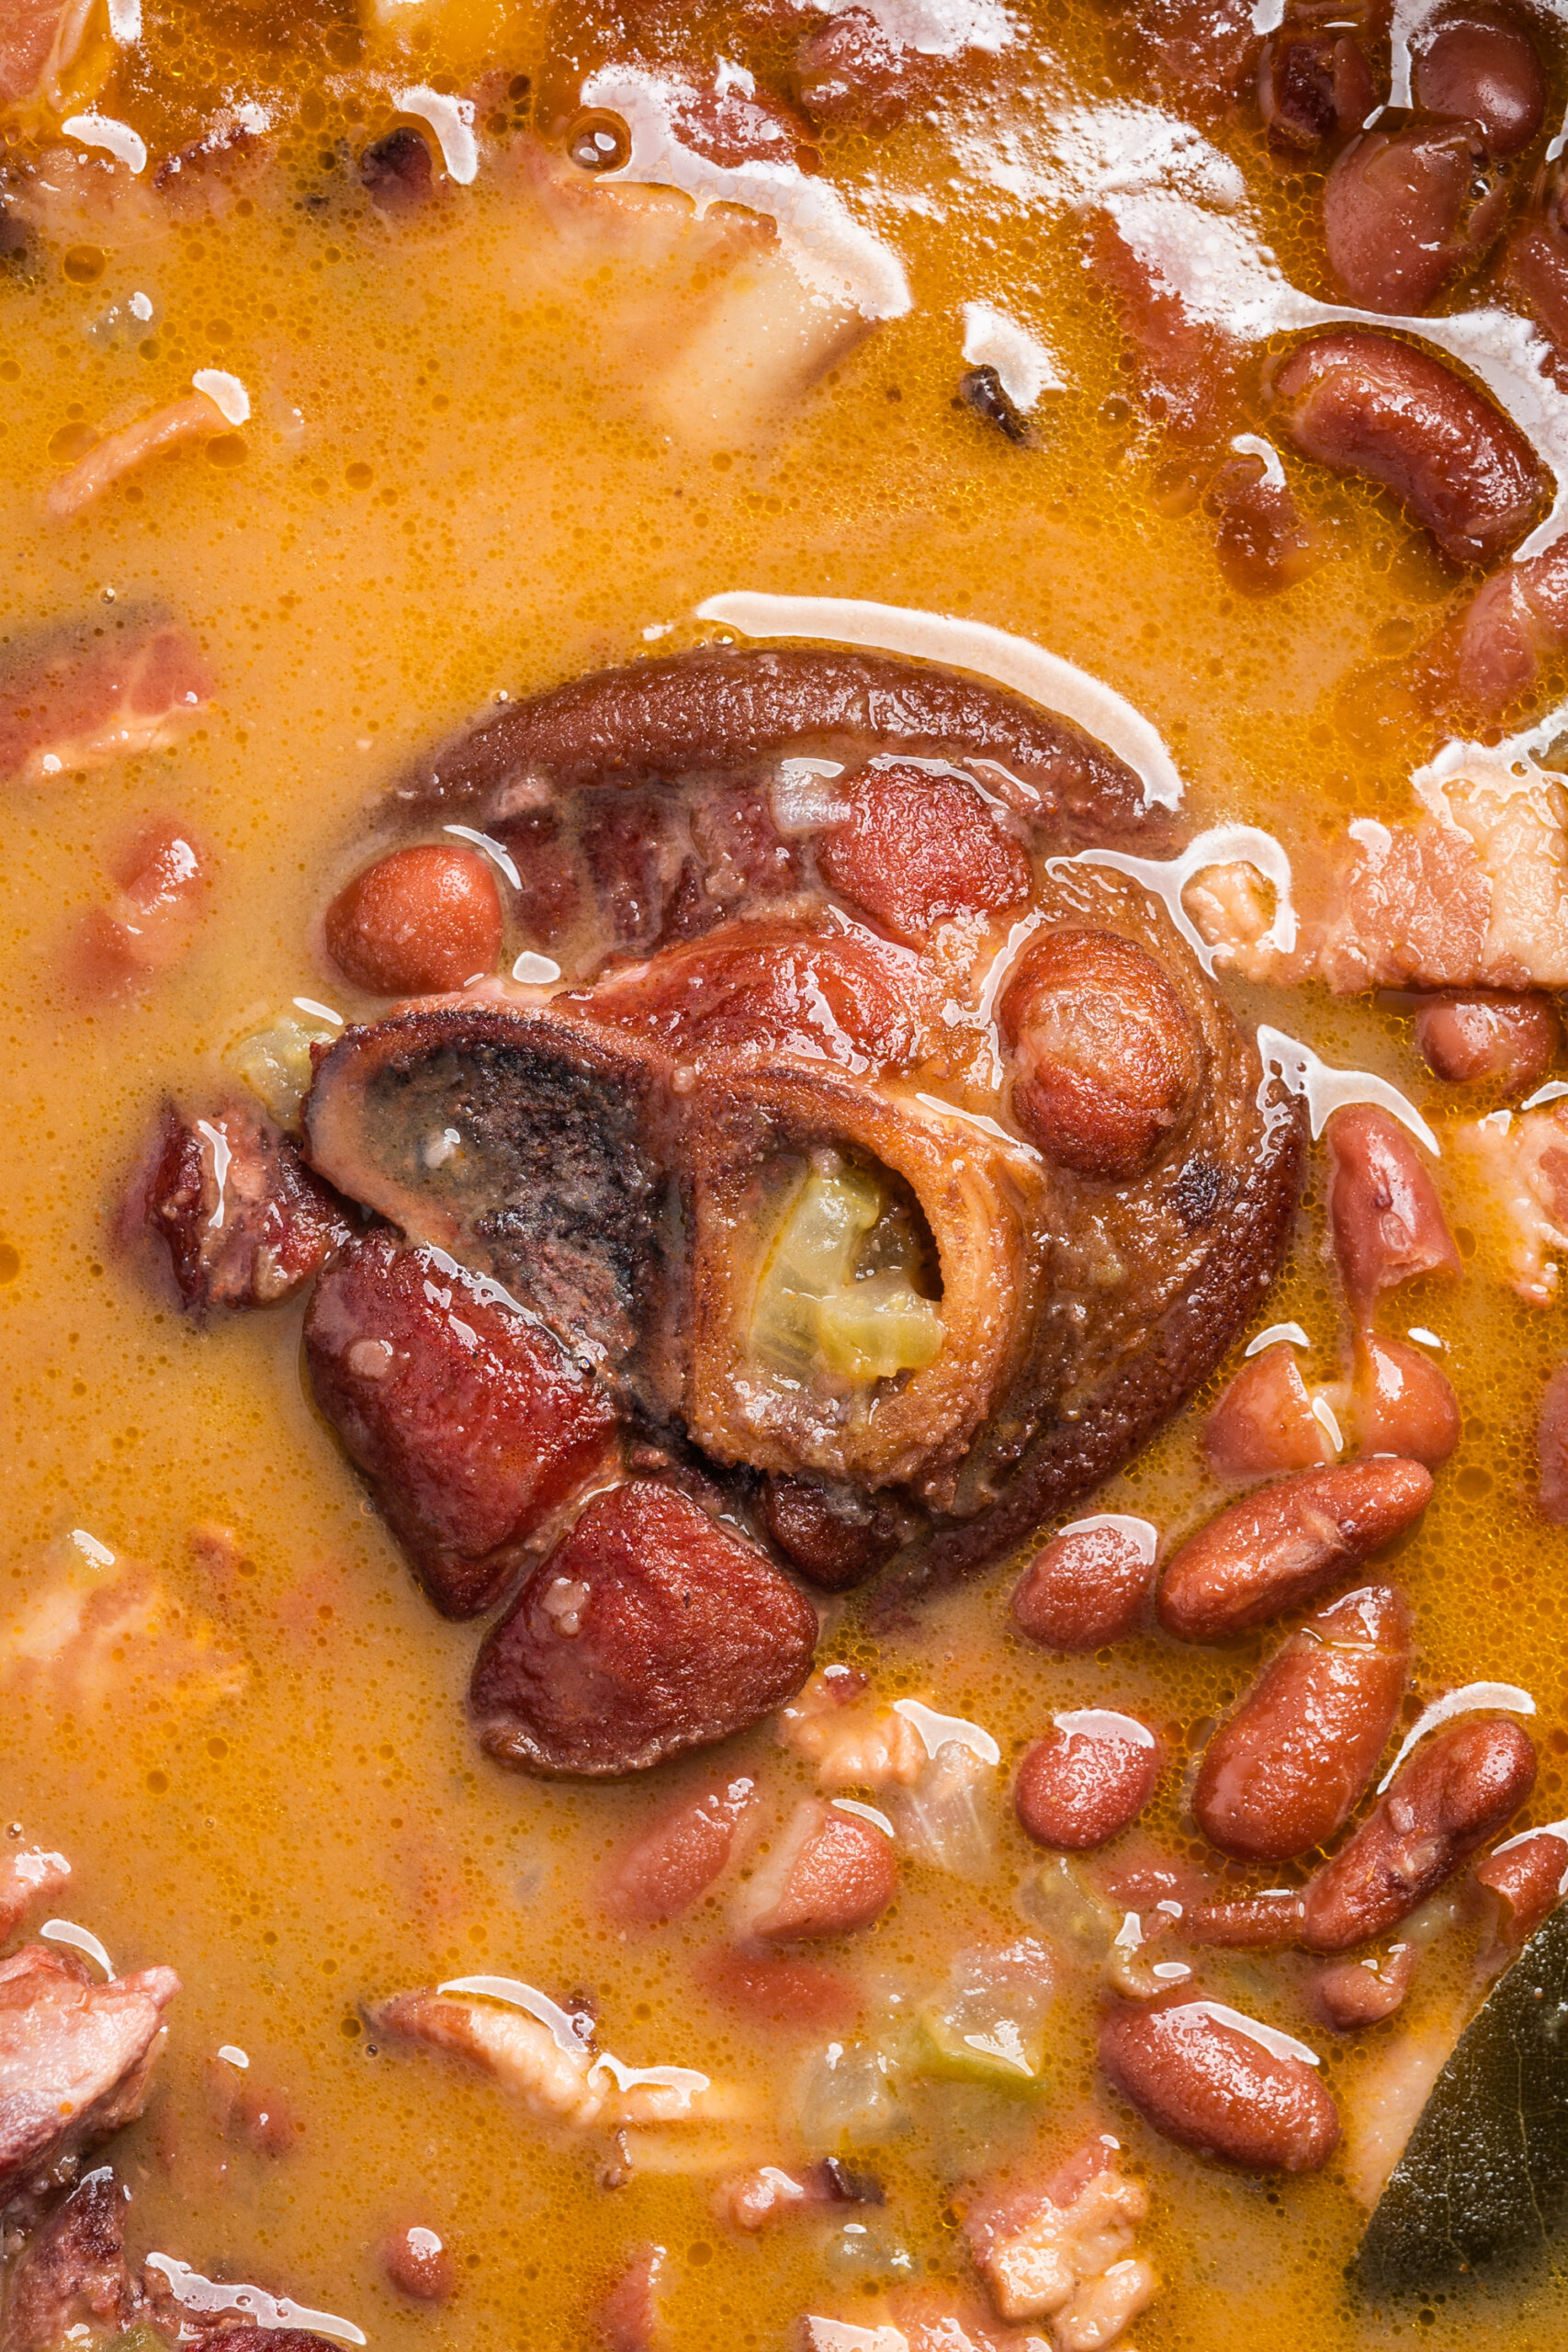 A ham hock floats in a Dutch oven filled with red beans